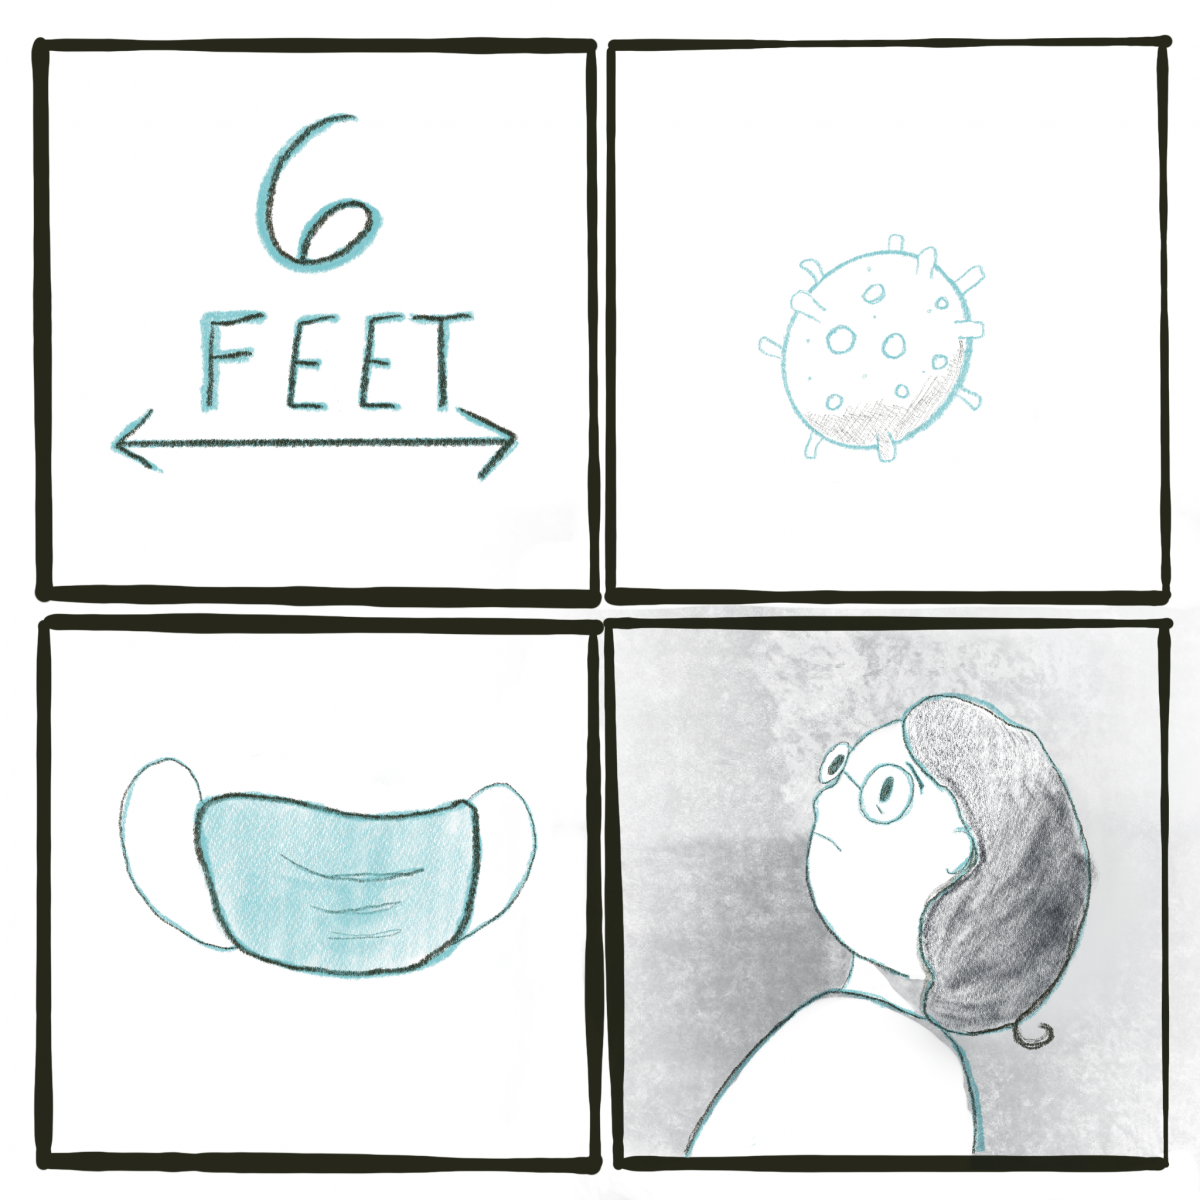 Illustration of four square frames. From top left, clockwise, there is a sign that says 6 FEET with arrows, a doodle of a circle with ends sticking out, a person with glasses and black hair looking up, and a mask.